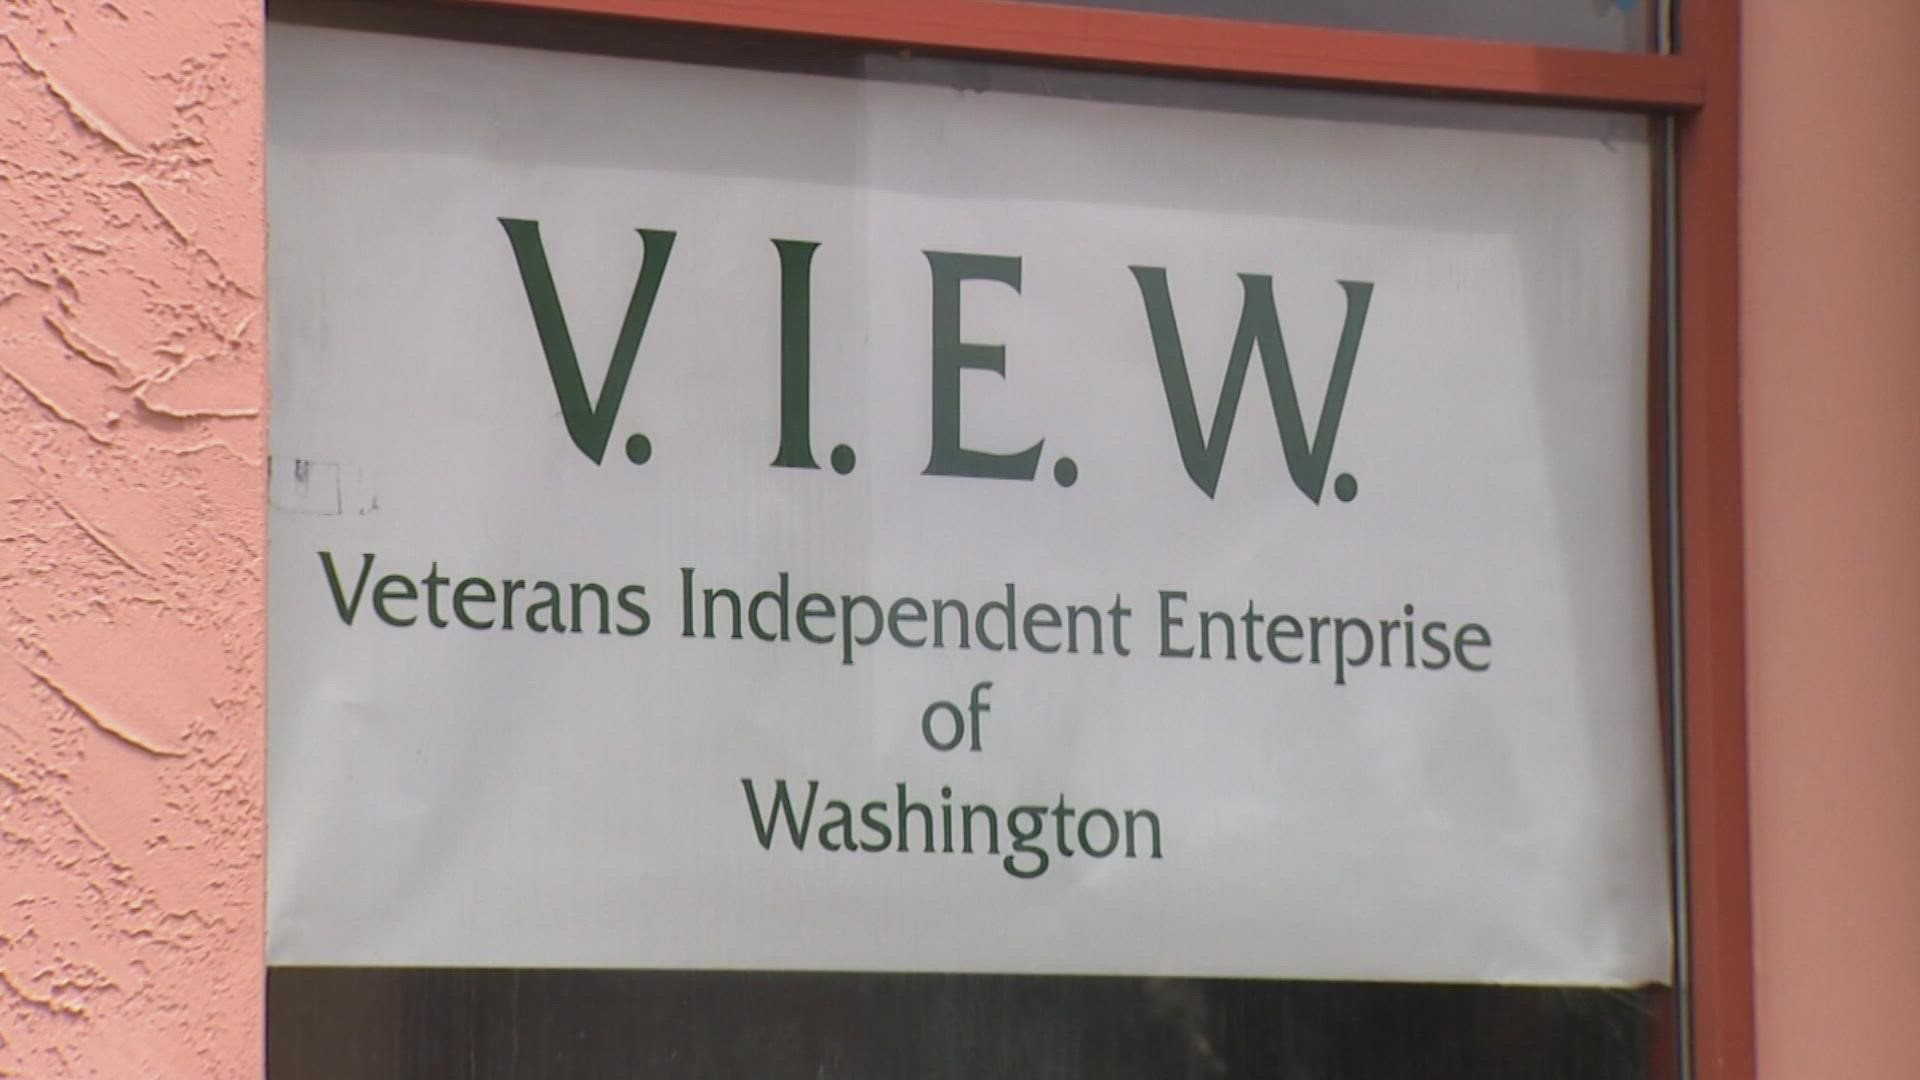 A 2018 class-action lawsuit filed by veterans against their employer has been settled, with the former employees getting long-awaited backpay.